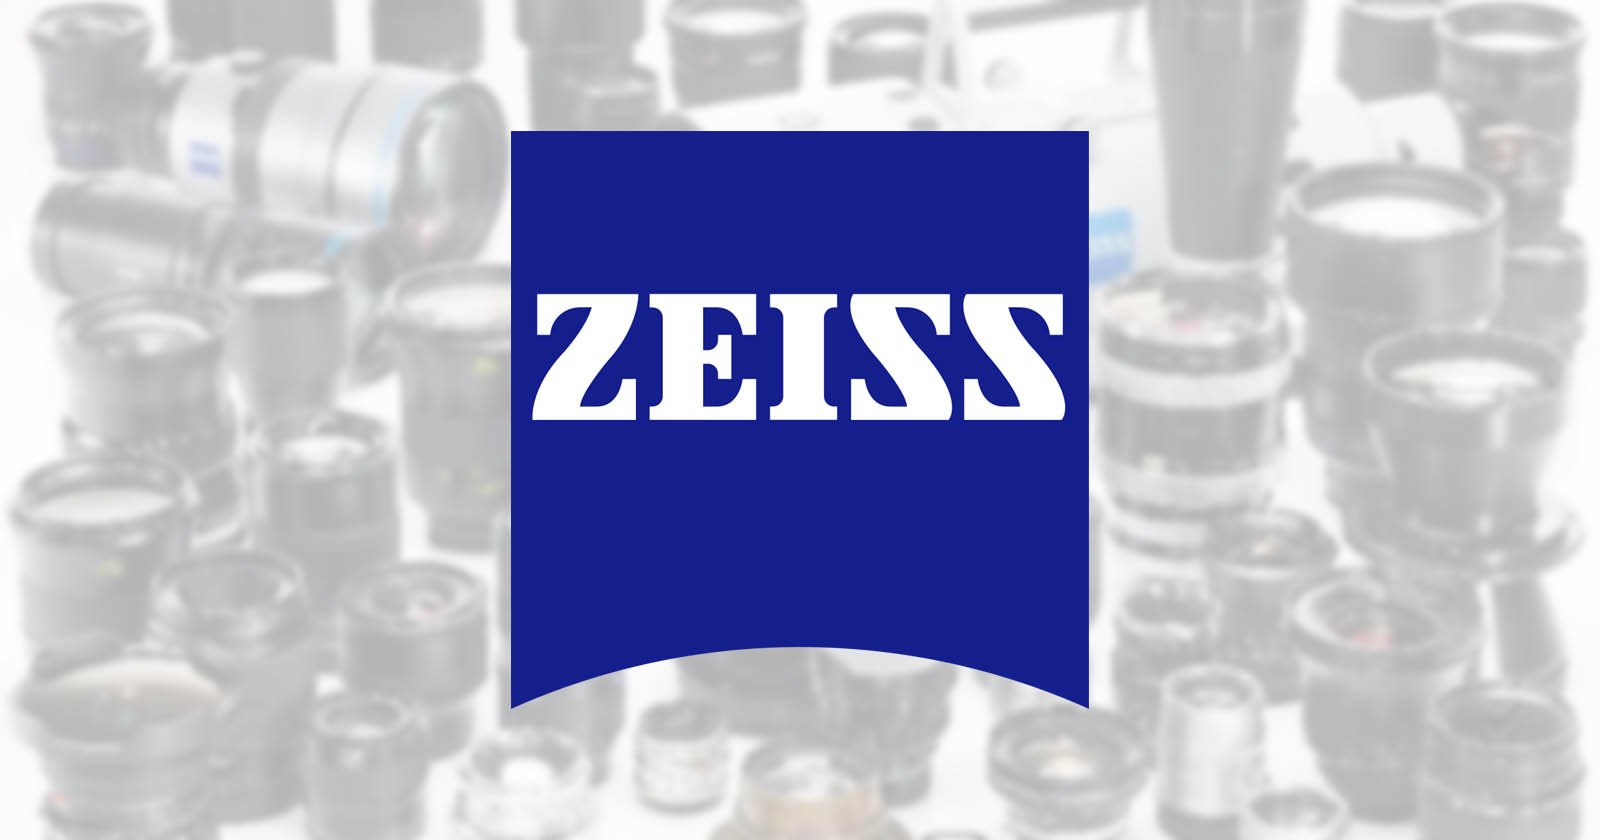 ZEISS receives FDA clearance for CLARUS 700, enabling high-resolution,  ultra-widefield imaging with fluorescein angiography | Eye News